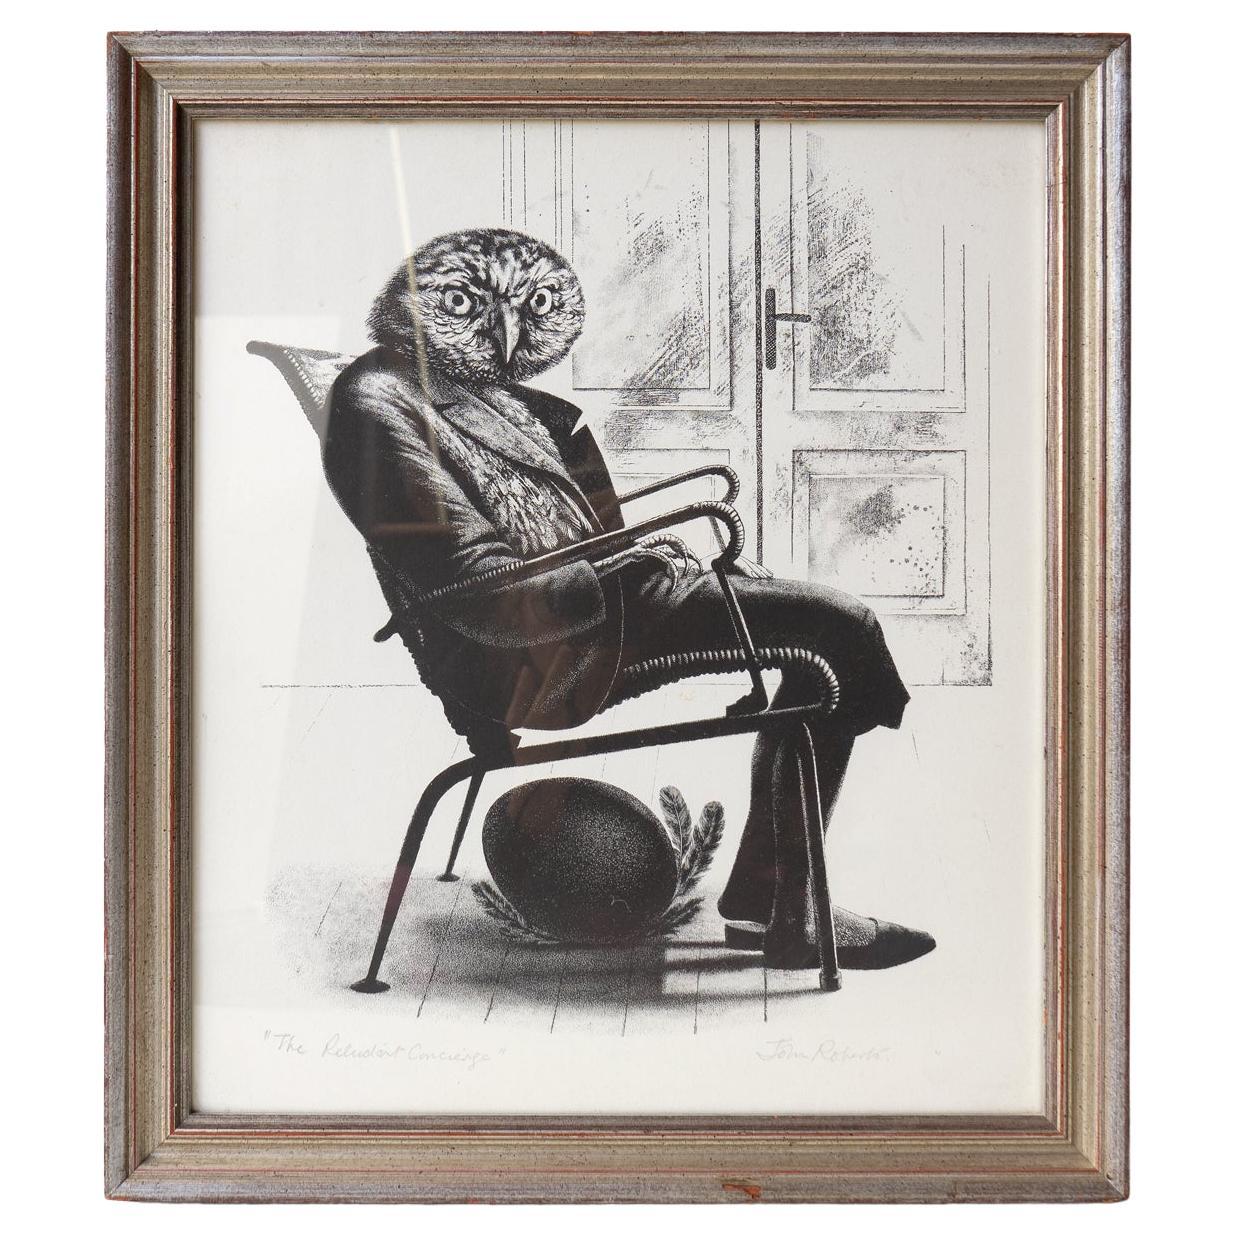 Vintage Monochrome Anthropomorphic Owl Print By John Roberts, Mid 20th Century For Sale